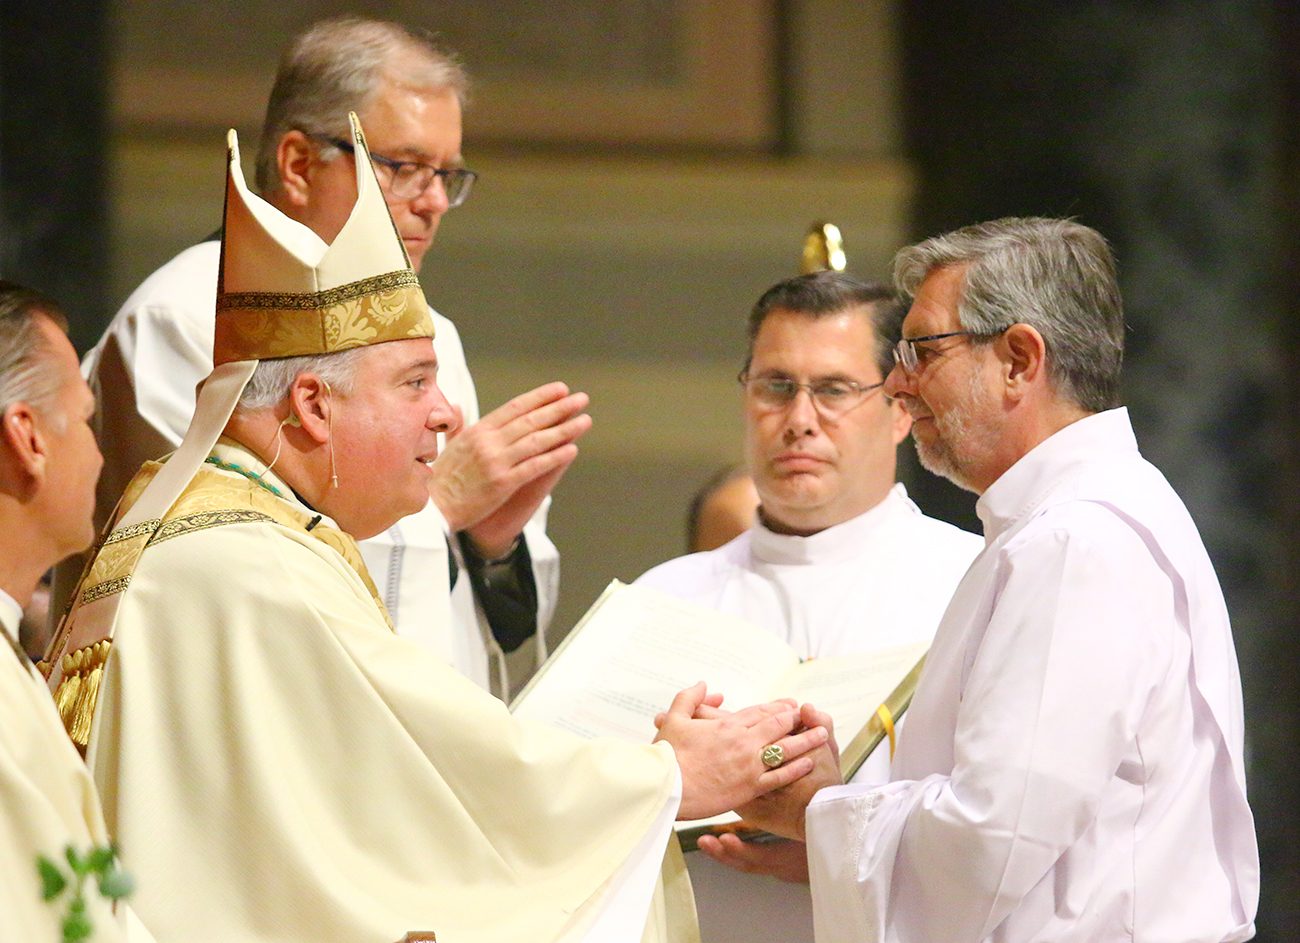 Deacon Franz N. Fruehwald right) makes the promise of the elect to Archbishop Nelson Perez during the diaconate ordination Mass June 13.